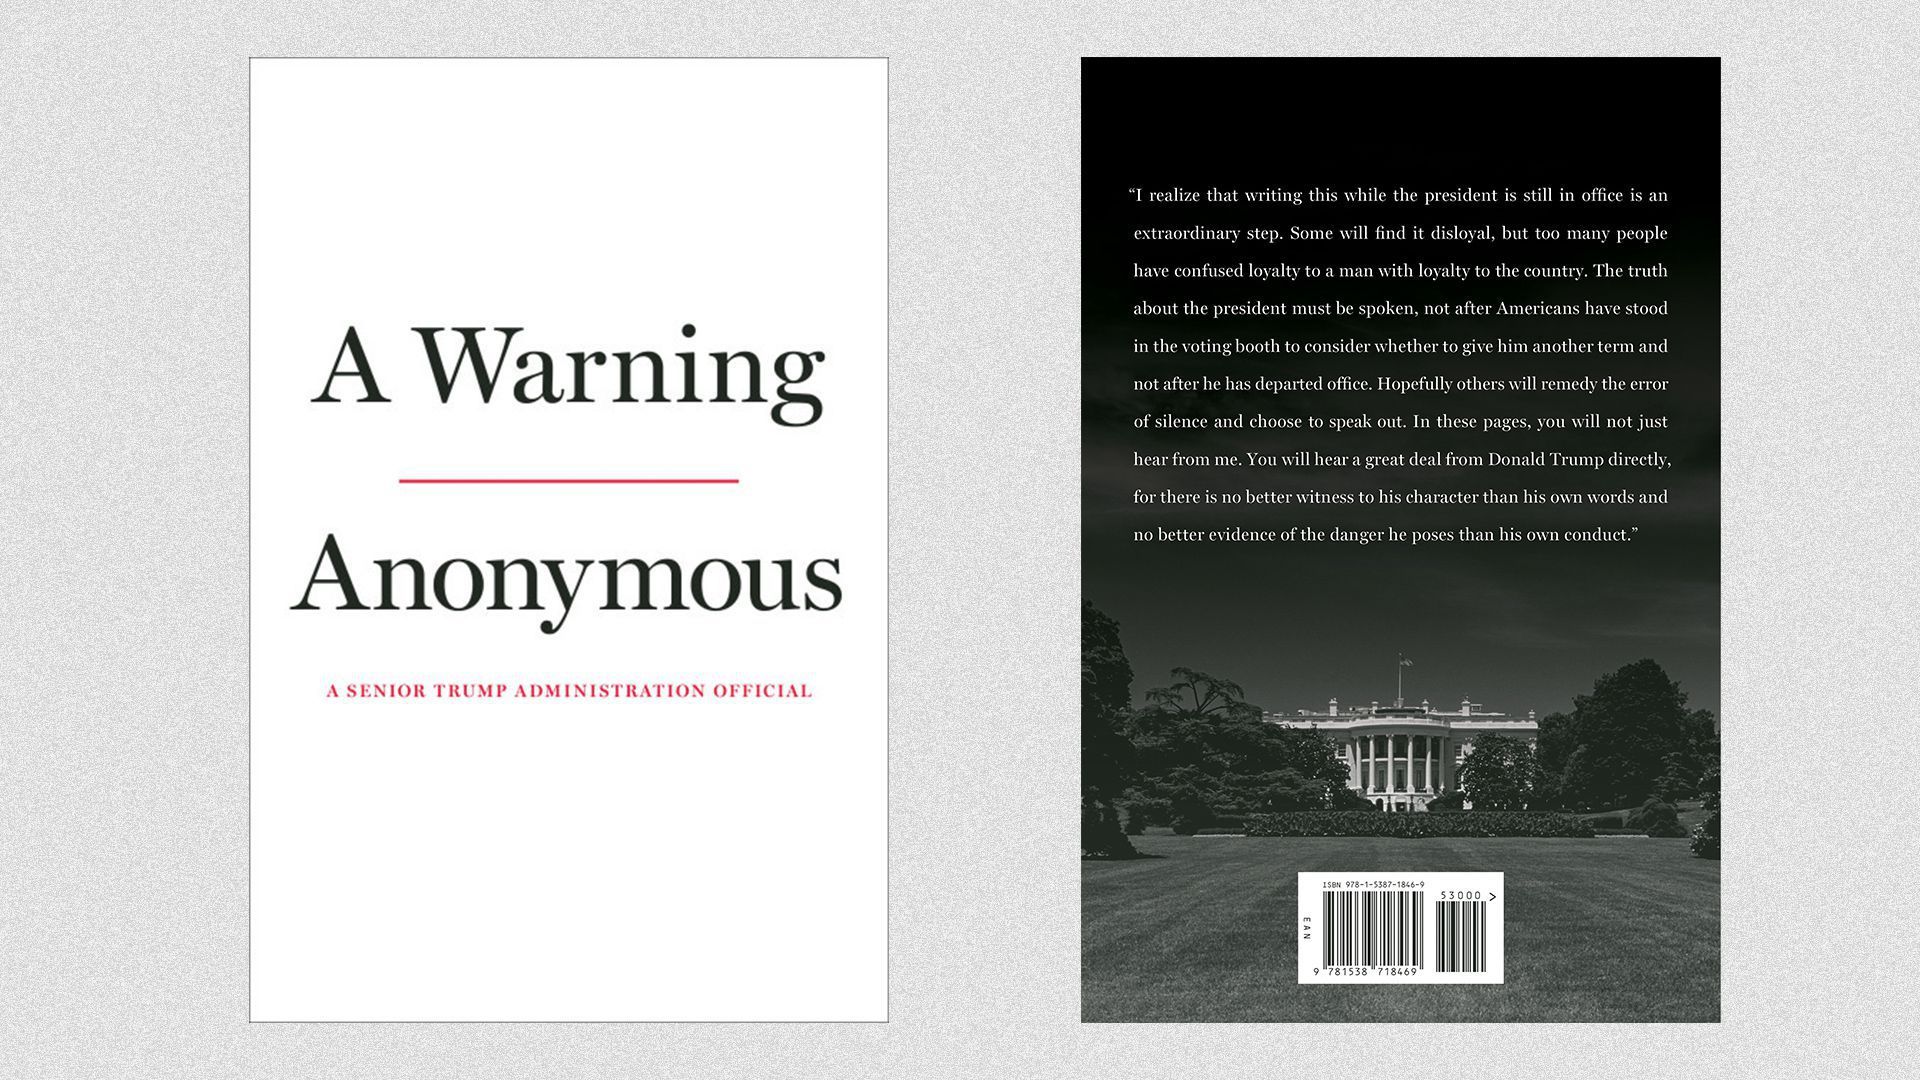 The cover of the book "A Warning," by Anonymous